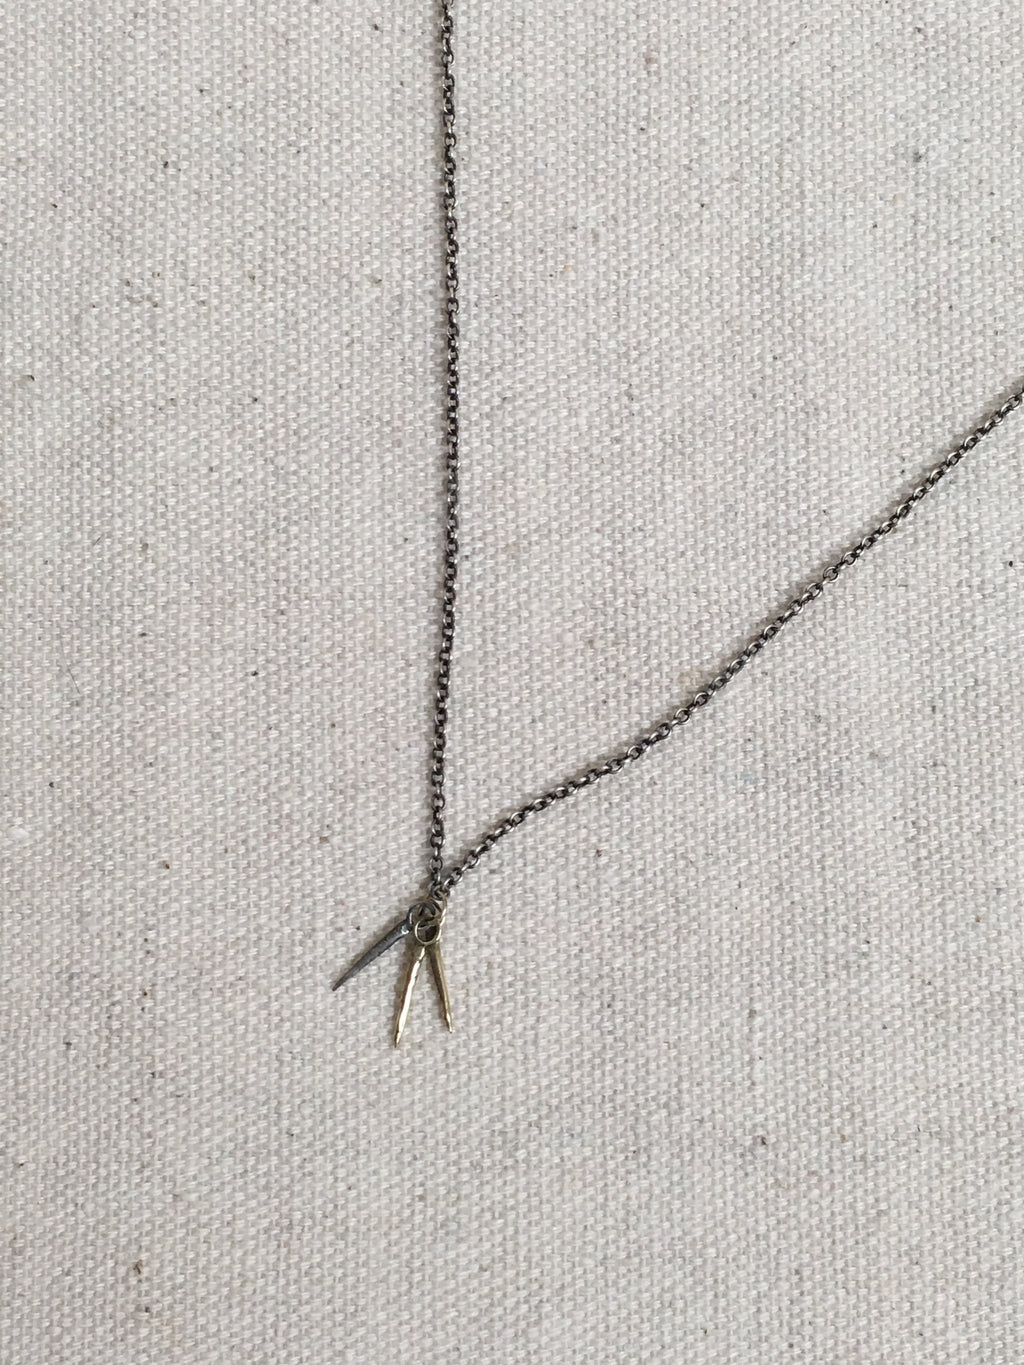 Kria Three Spike Necklace